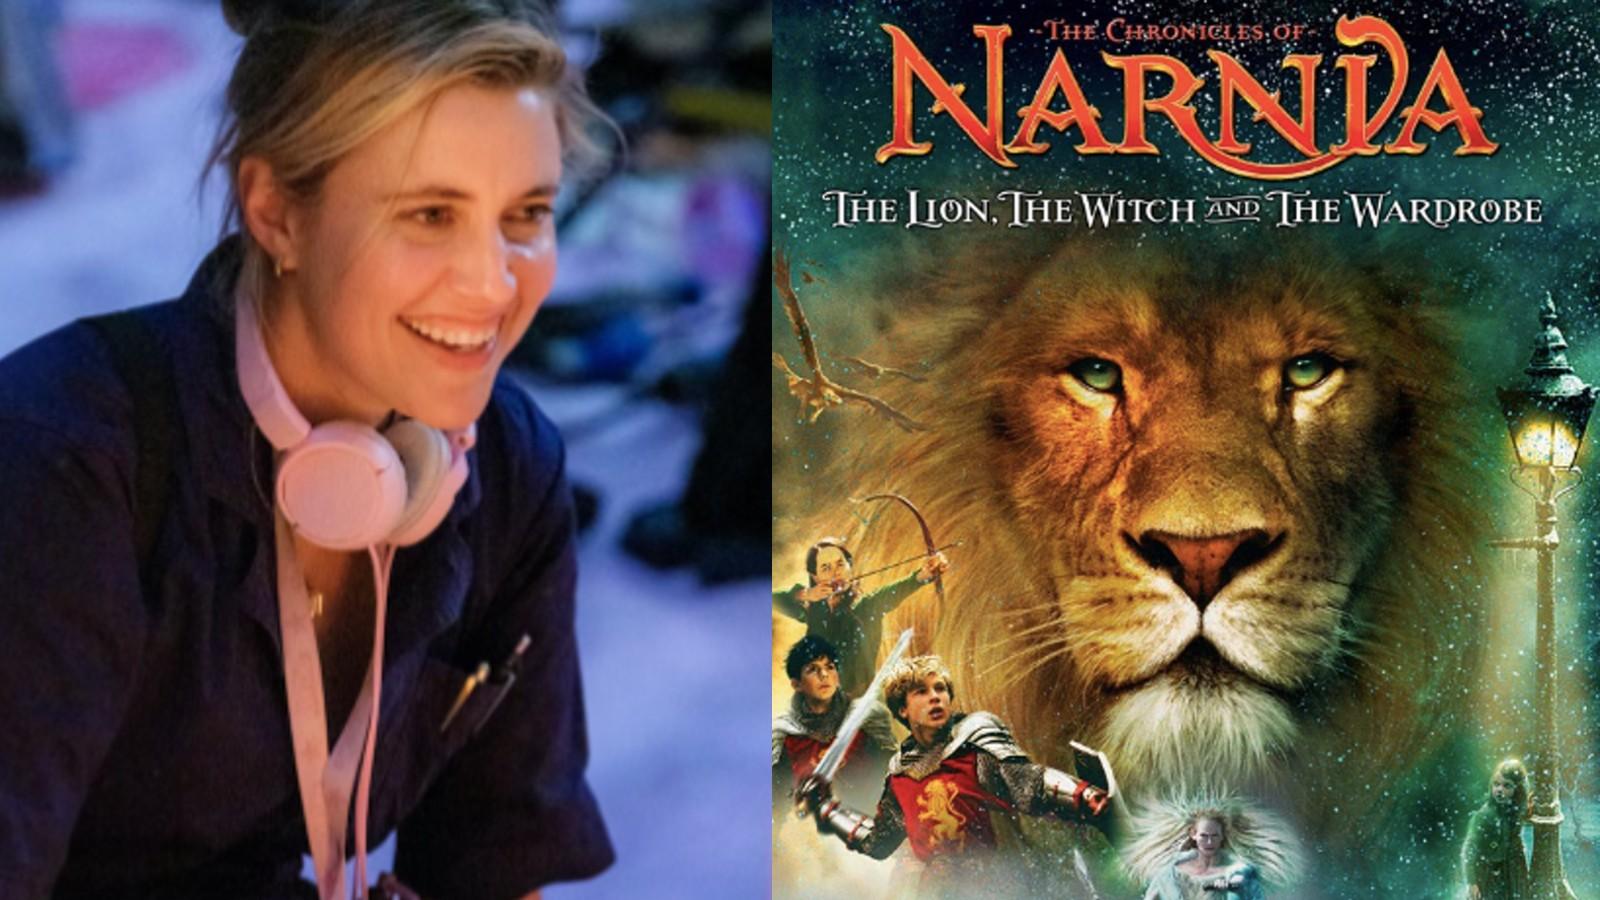 Greta Gerwig on the set of Barbie and a poster for The Chronicles of Narnia